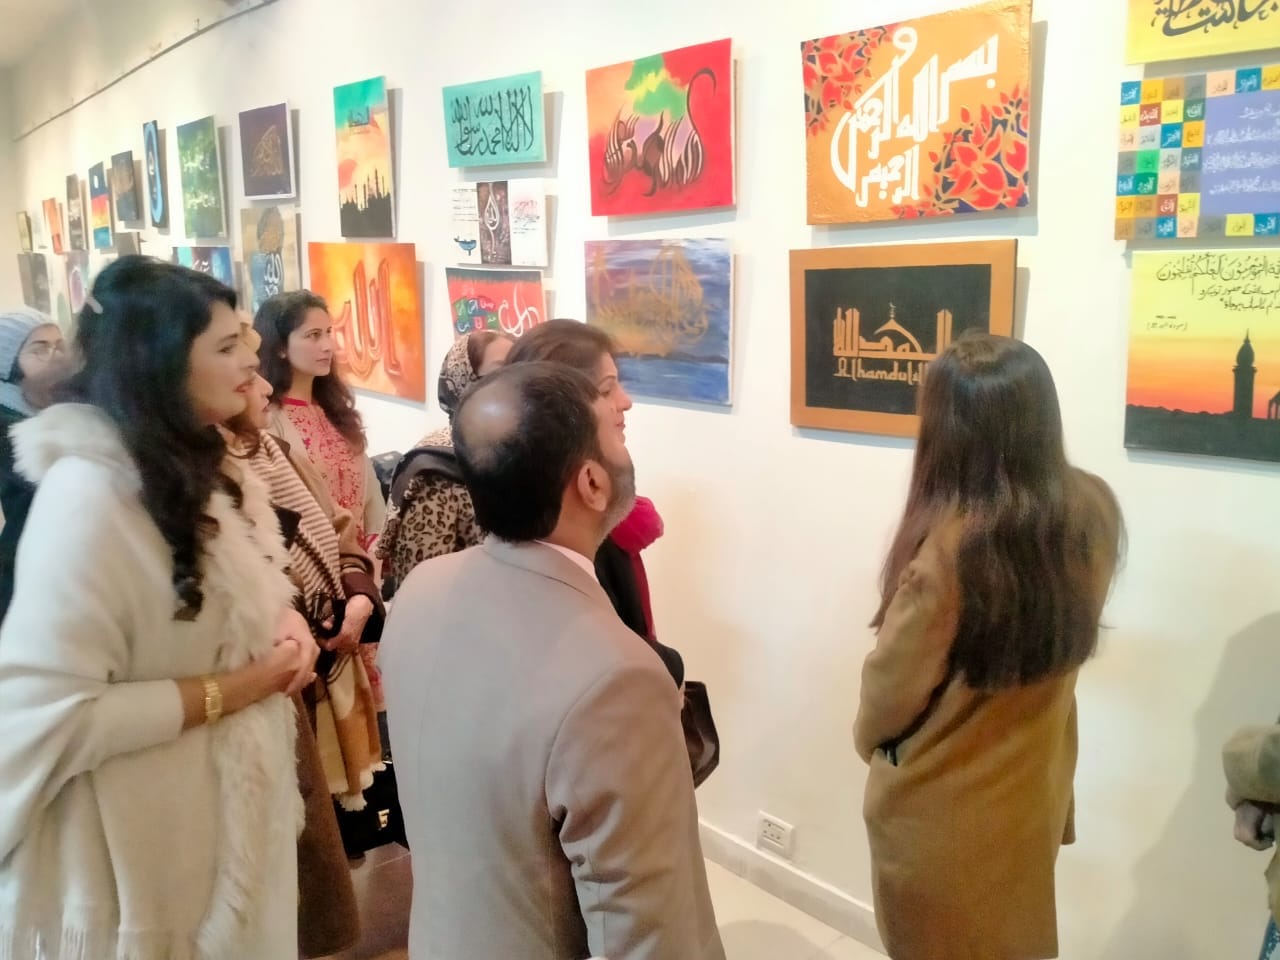 Certificate Distribution Ceremony of Painting Exhibition